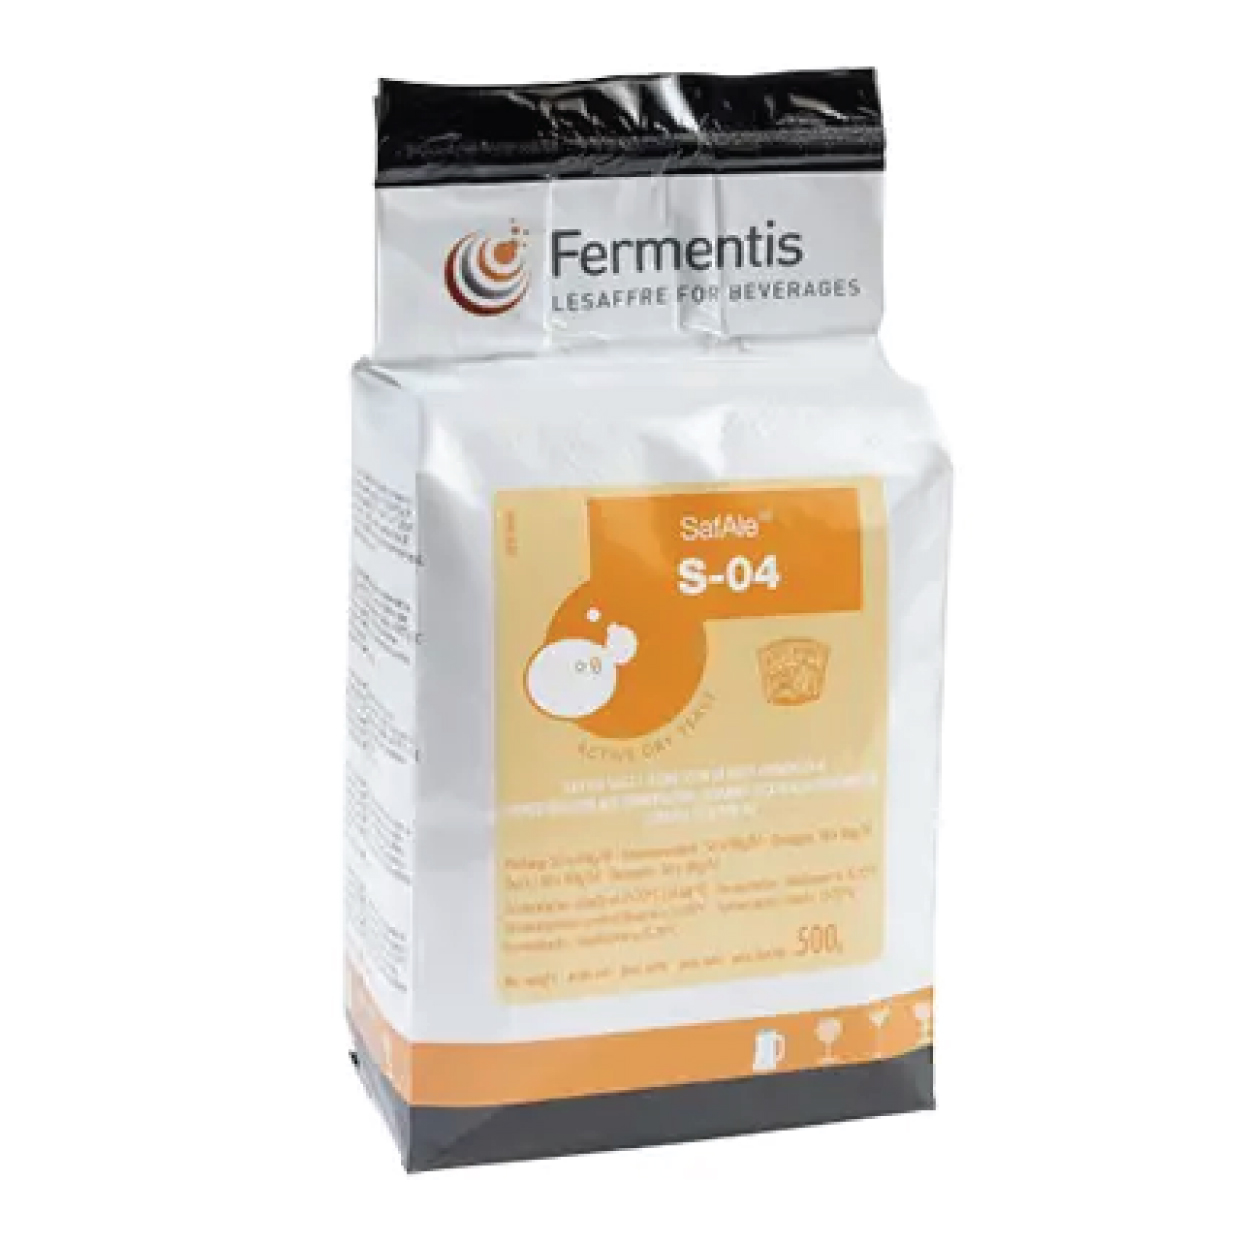 Product image for SafAle Yeast S-04 Ale - Fermentis